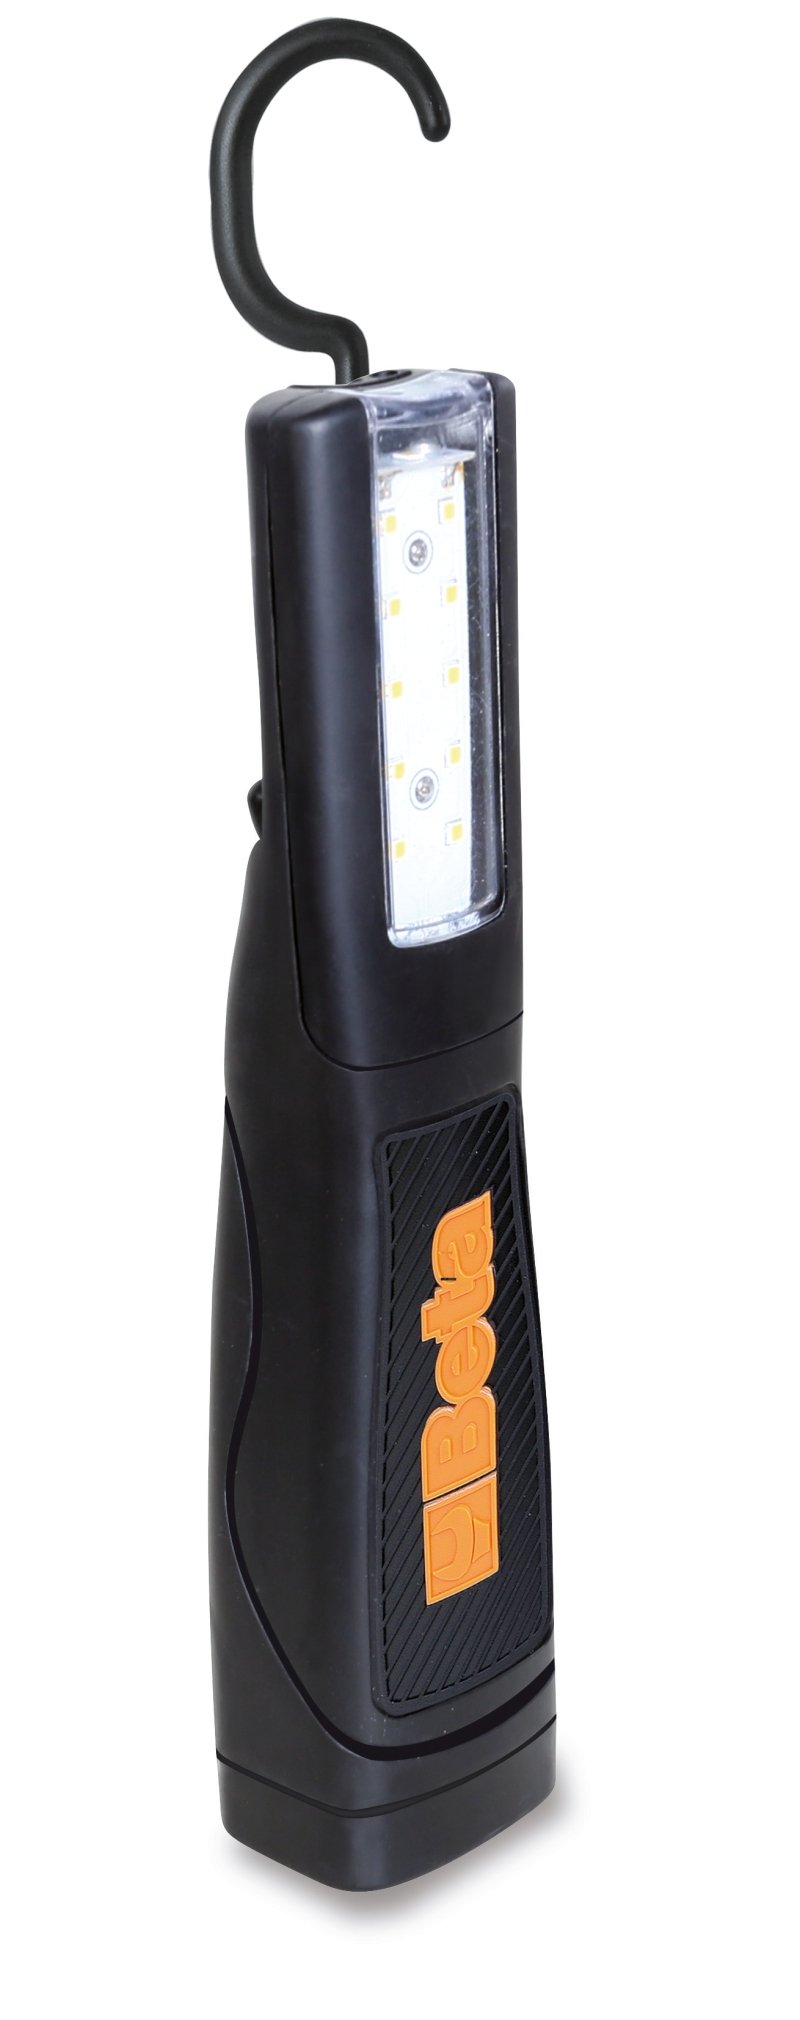 1838/11LED - Rechargeable inspection lamp with ultra-high brightness LEDs, lithium polymer battery